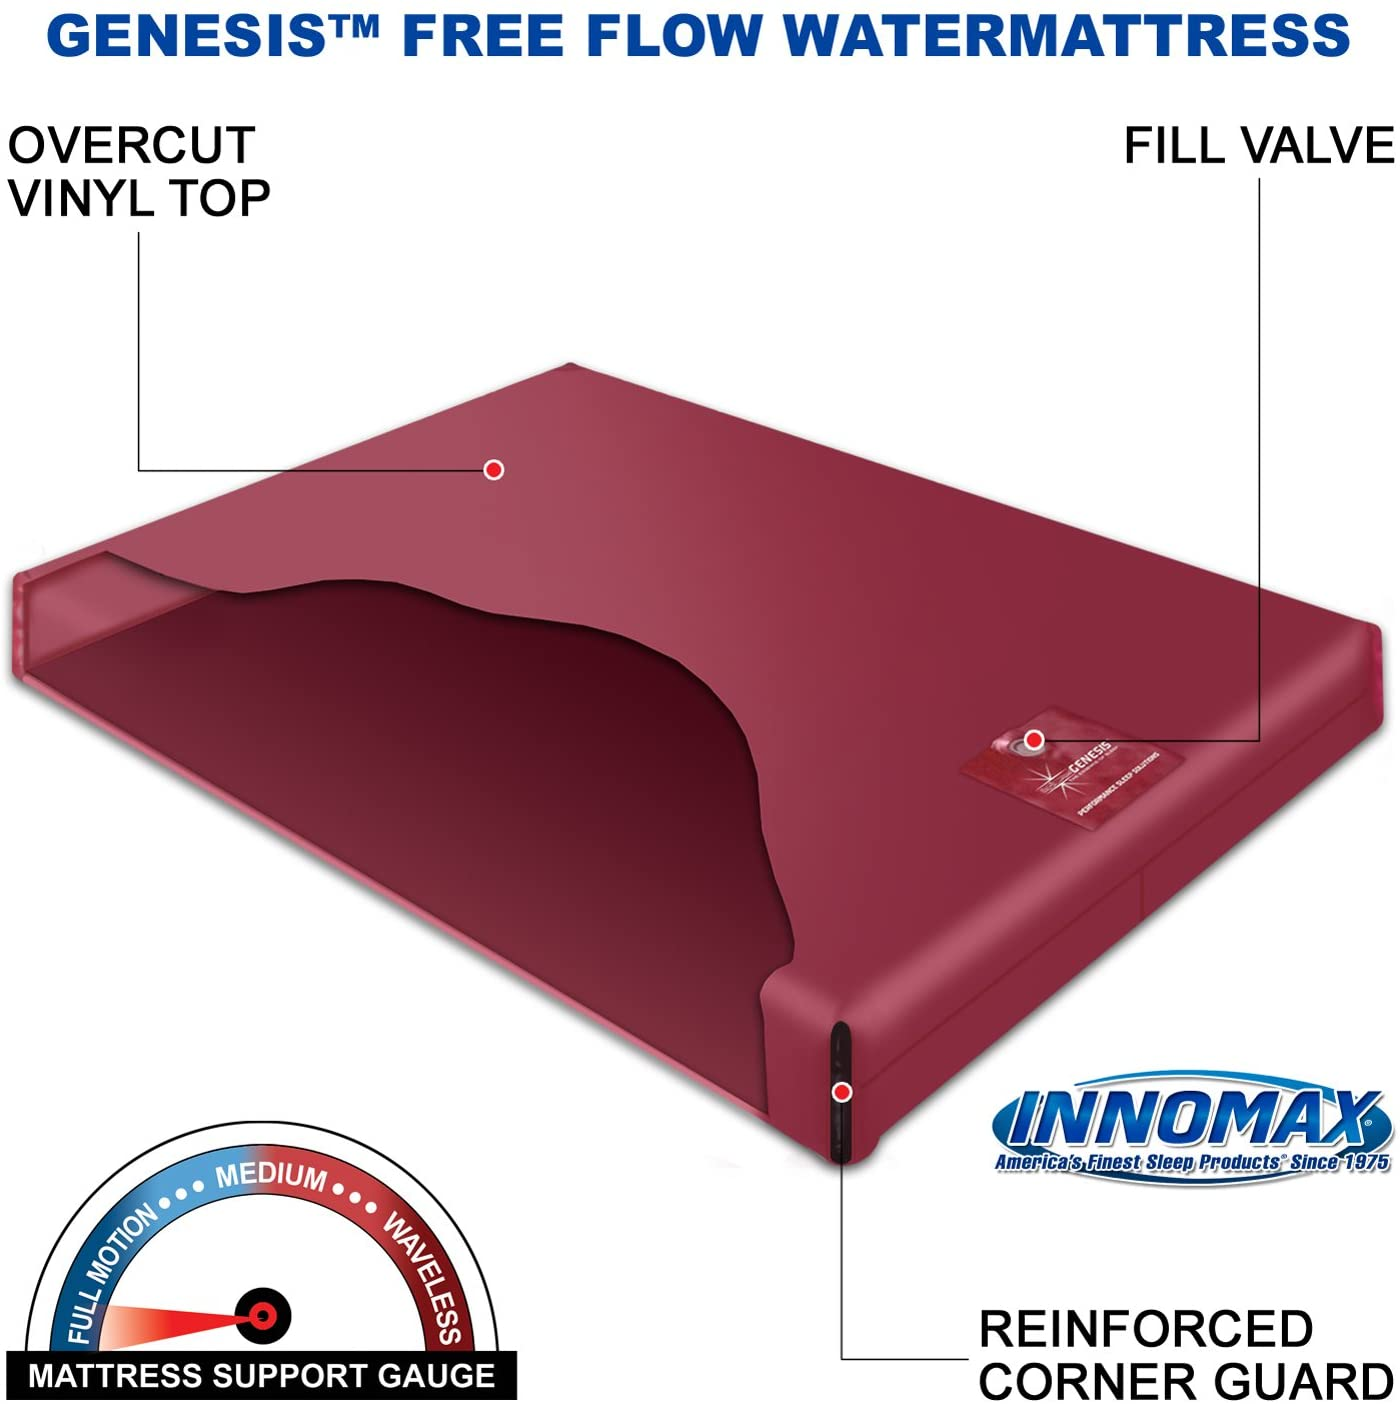 This waterbed costs less because it doesn’t have a heater and would need to be used with an approved heater.